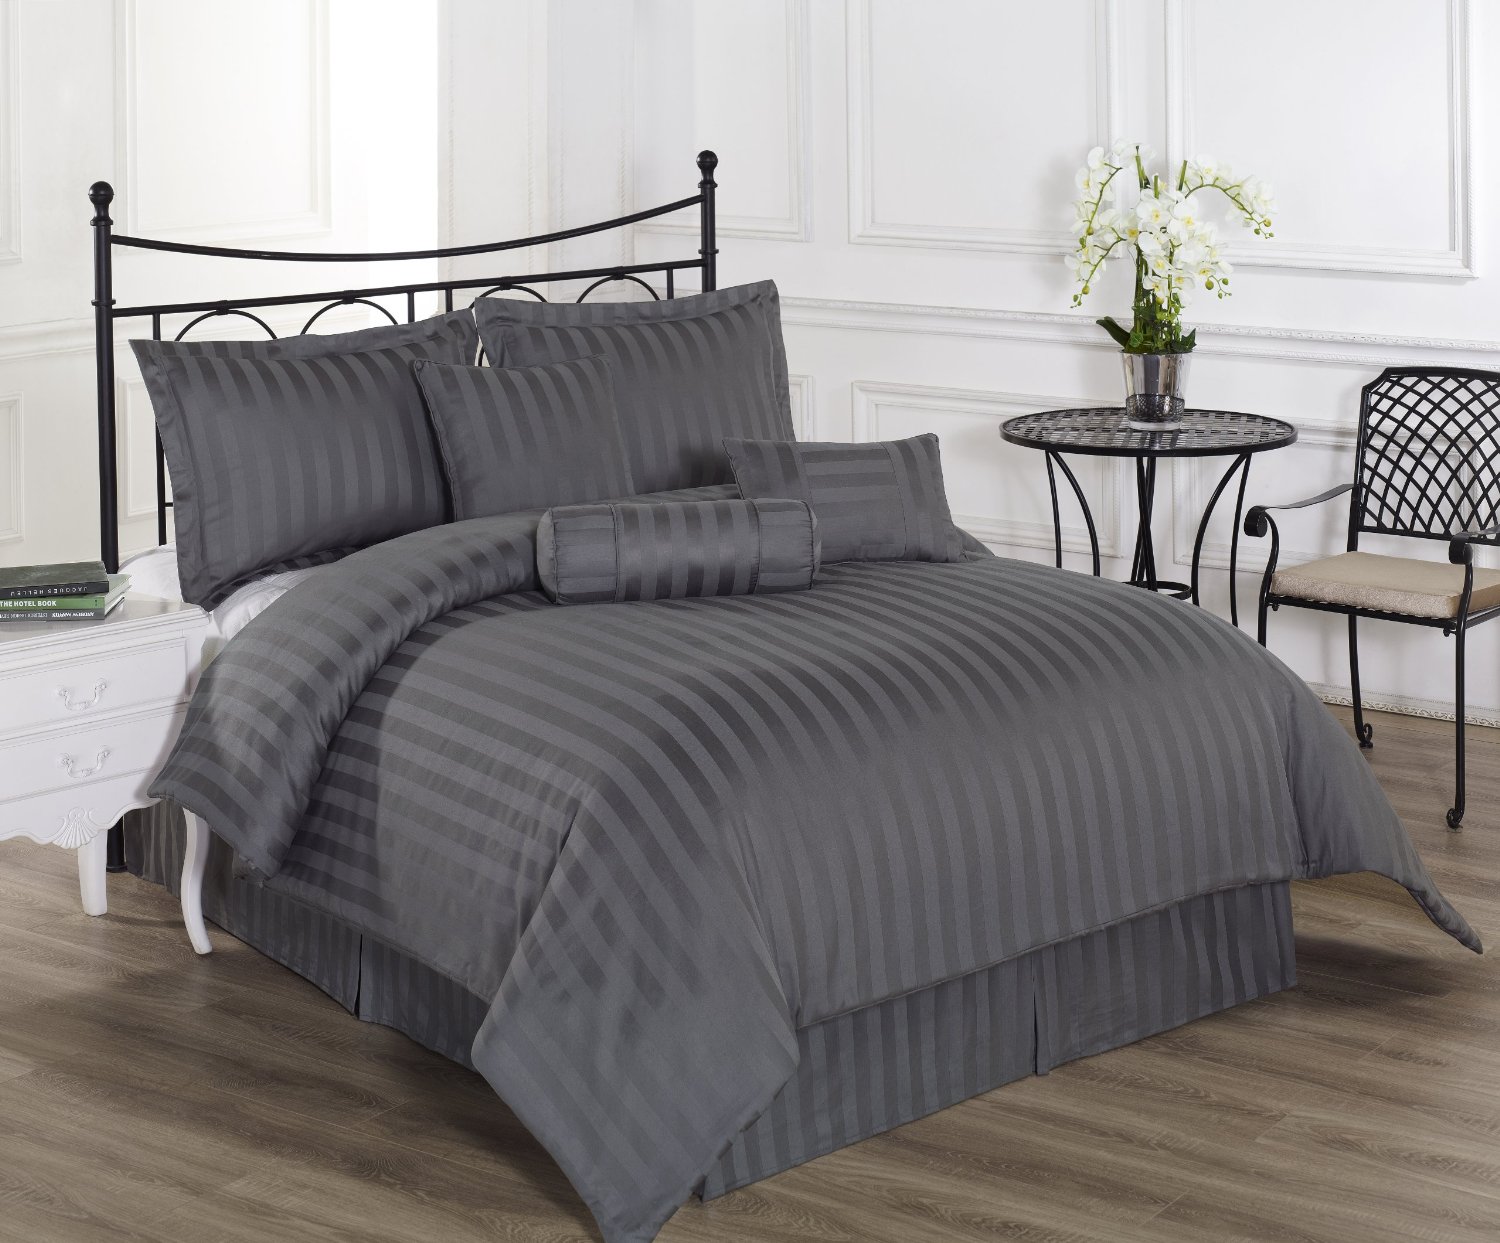 Royal Calico Charcoal Grey Bedding - Interiors By Color